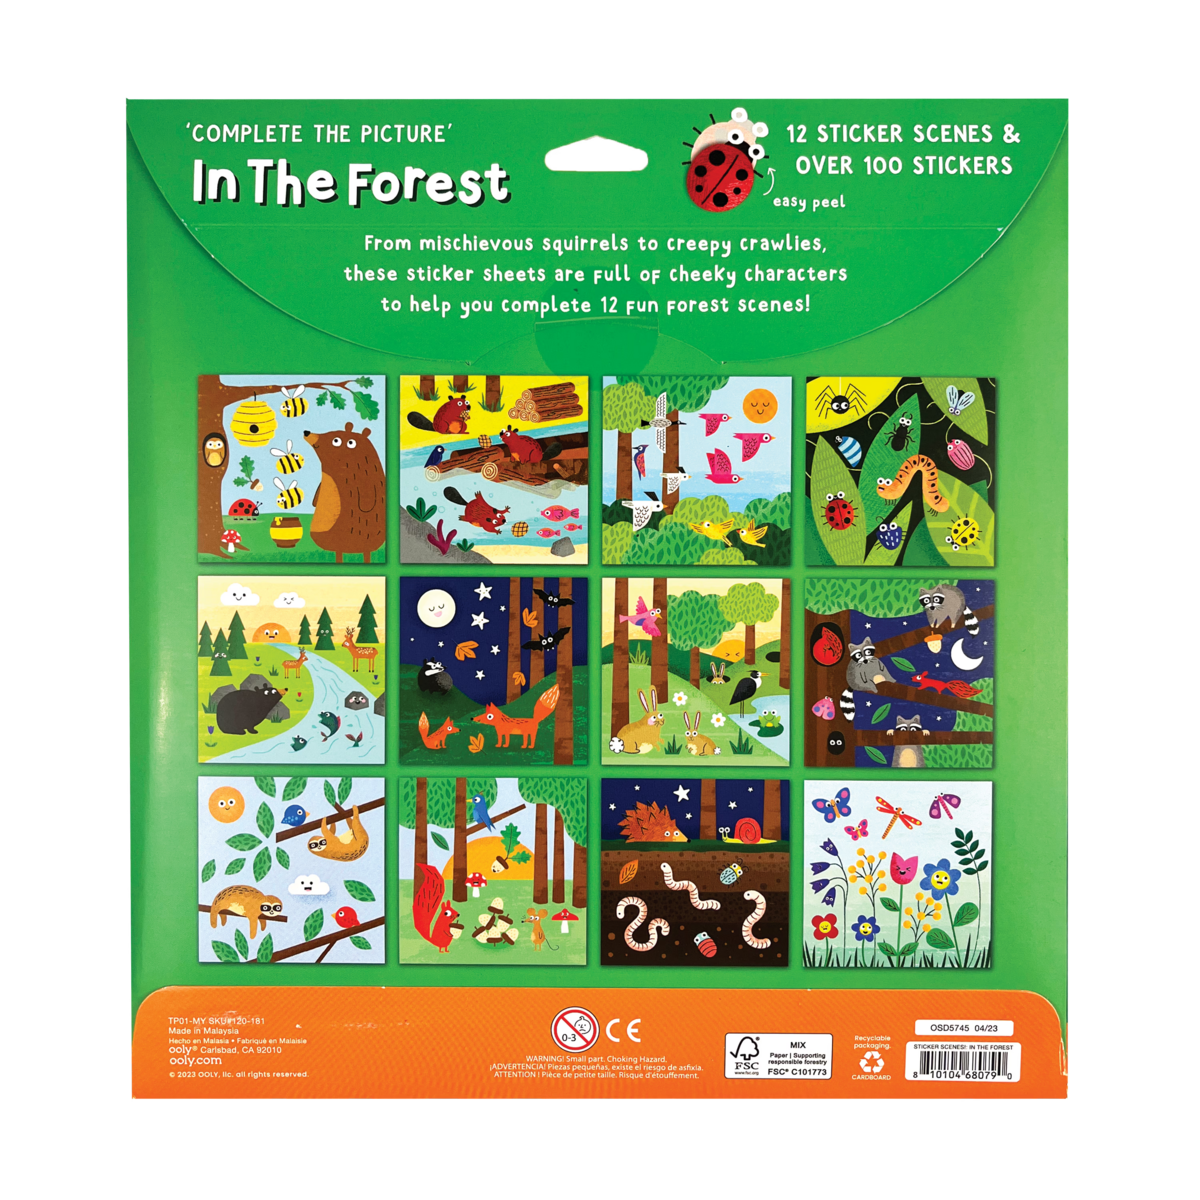 In the Forest Sticker Scenes! back of packaging